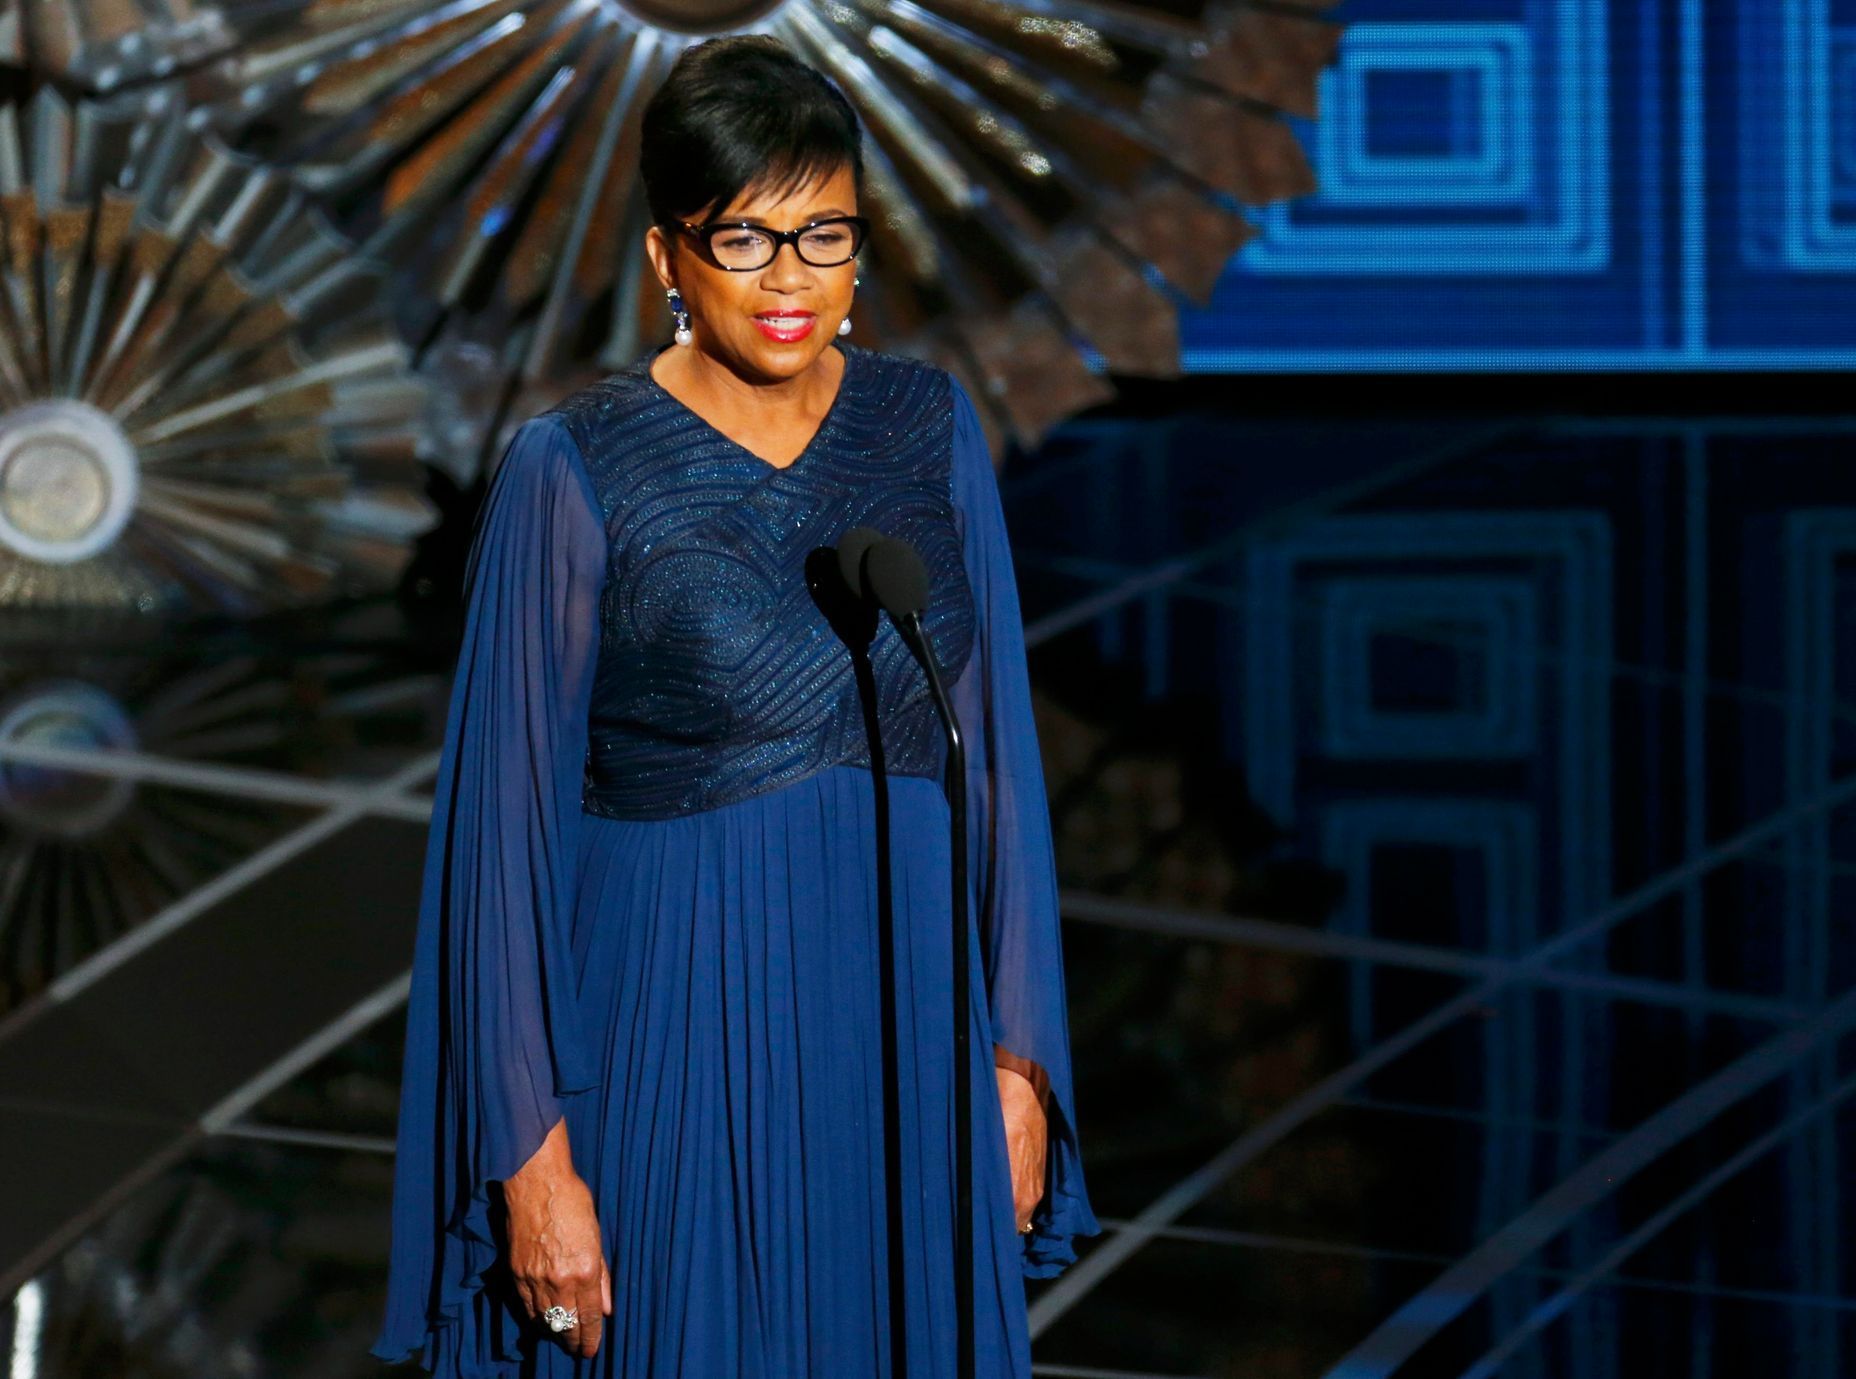 Academy of Motion Picture Arts and Sciences President Isaacs speaks at the 87th Academy Awards in Hollywood